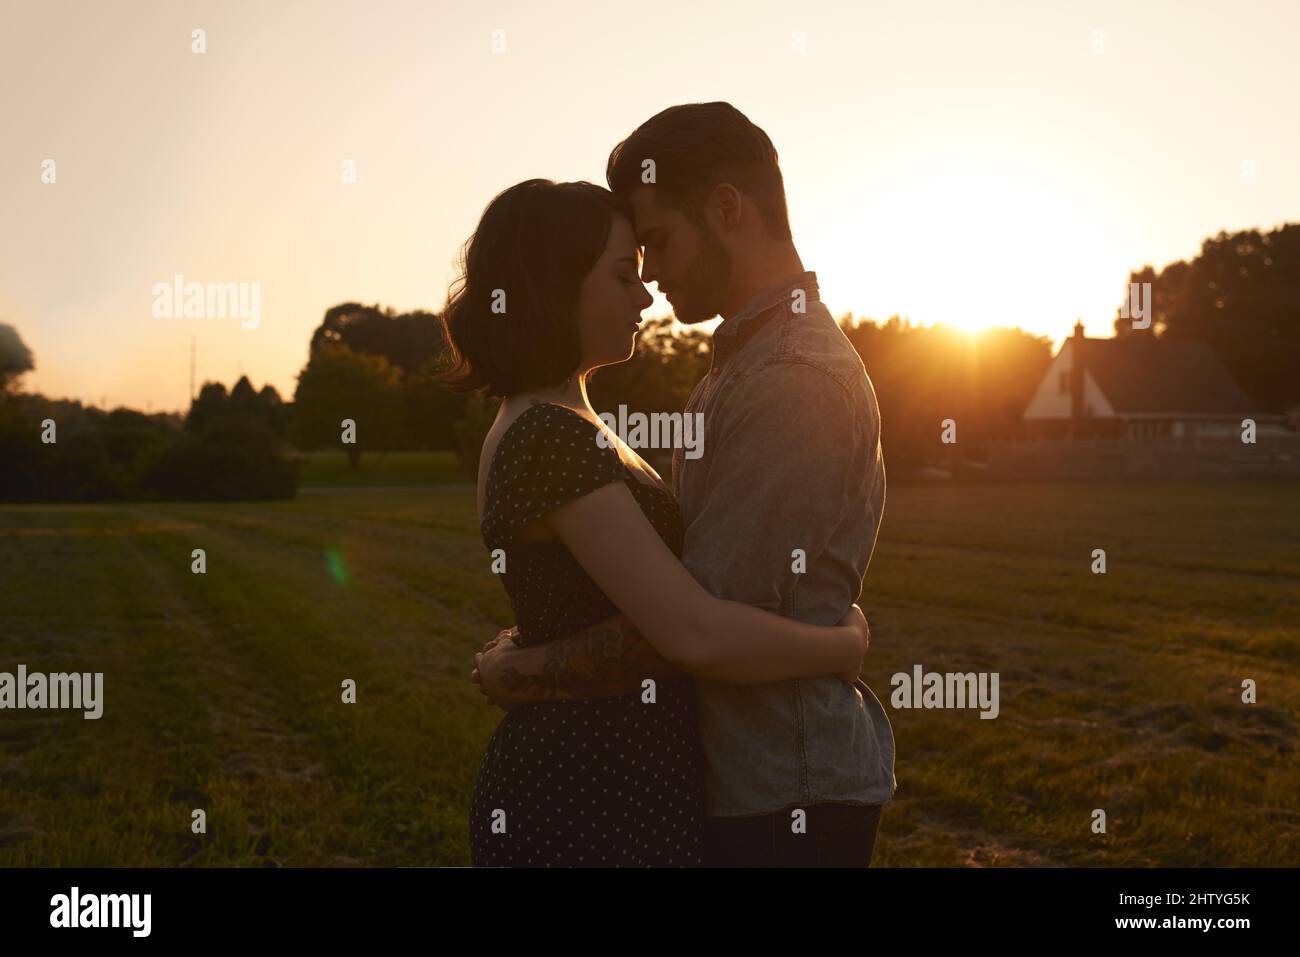 Connected by a deep love. Shot of an affectionate young couple outdoors. Stock Photo